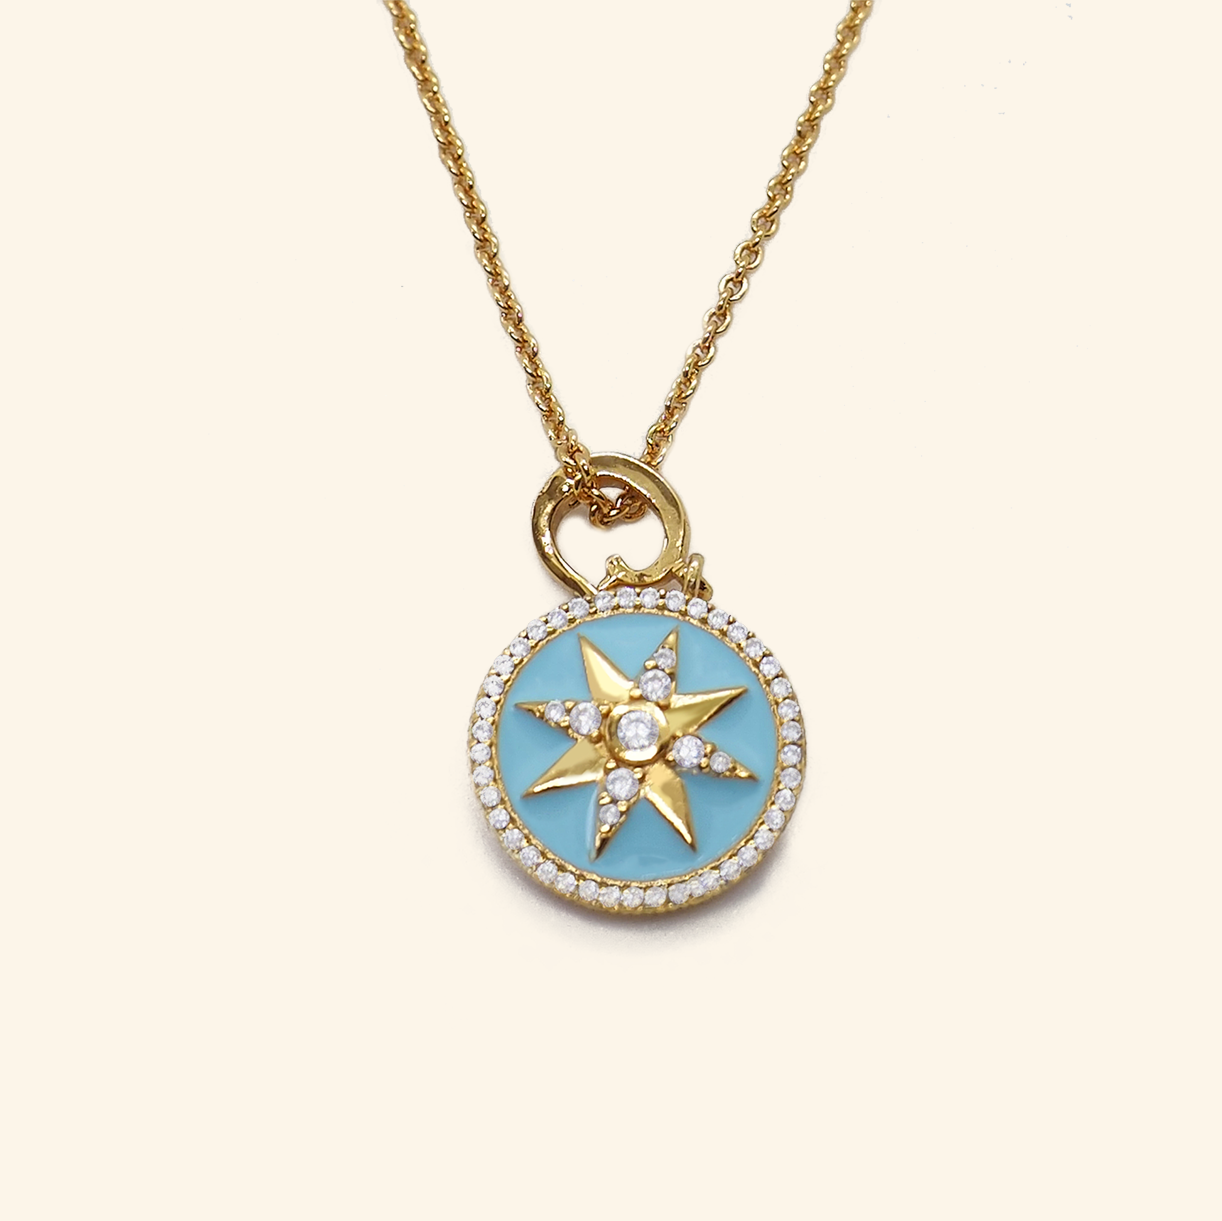 Blue North star necklace